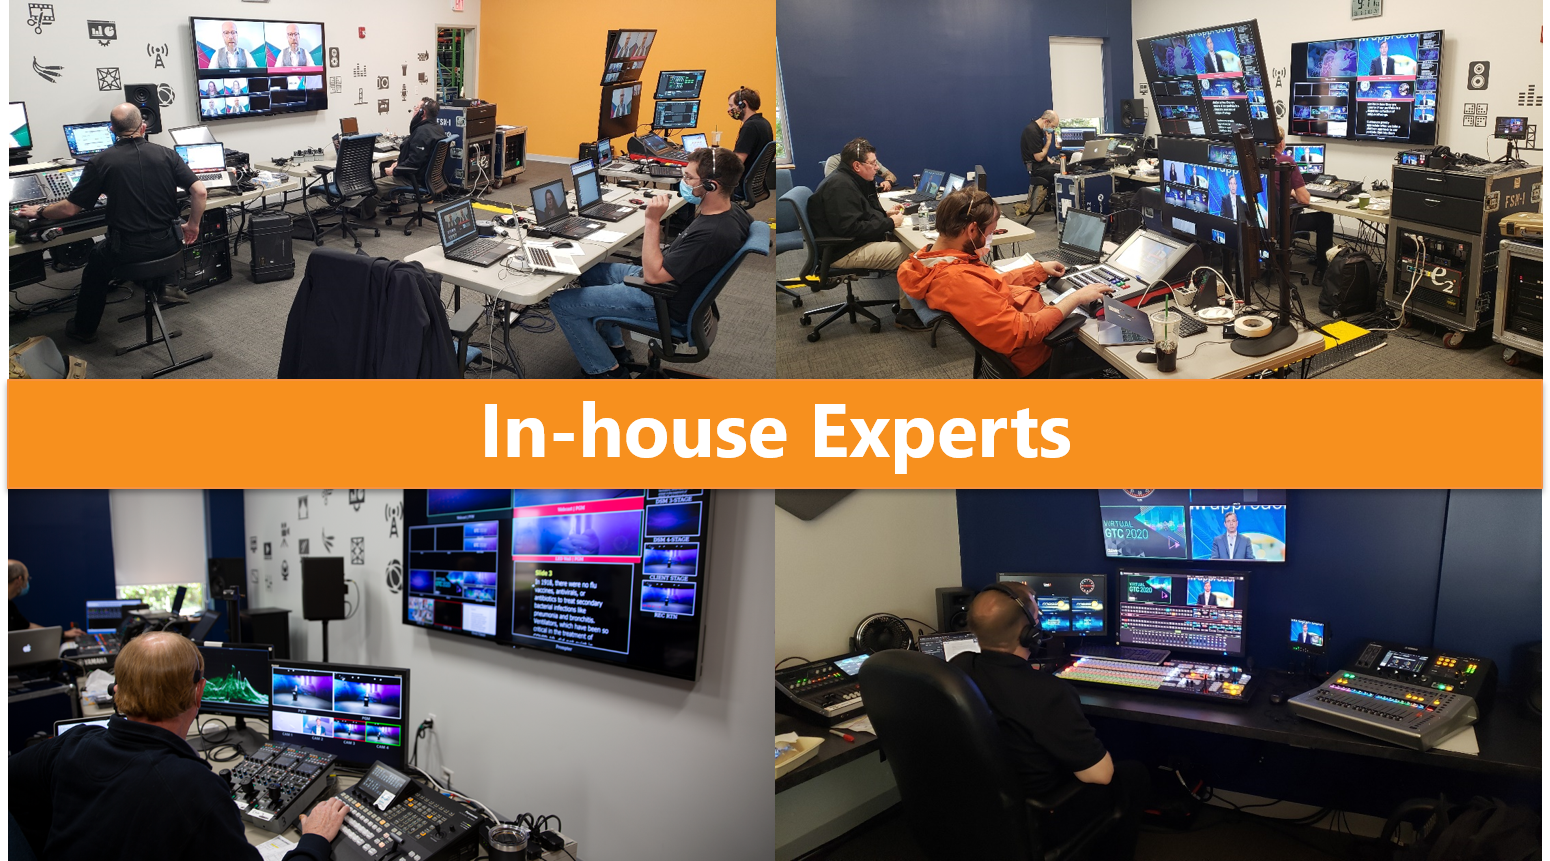 In house Experts